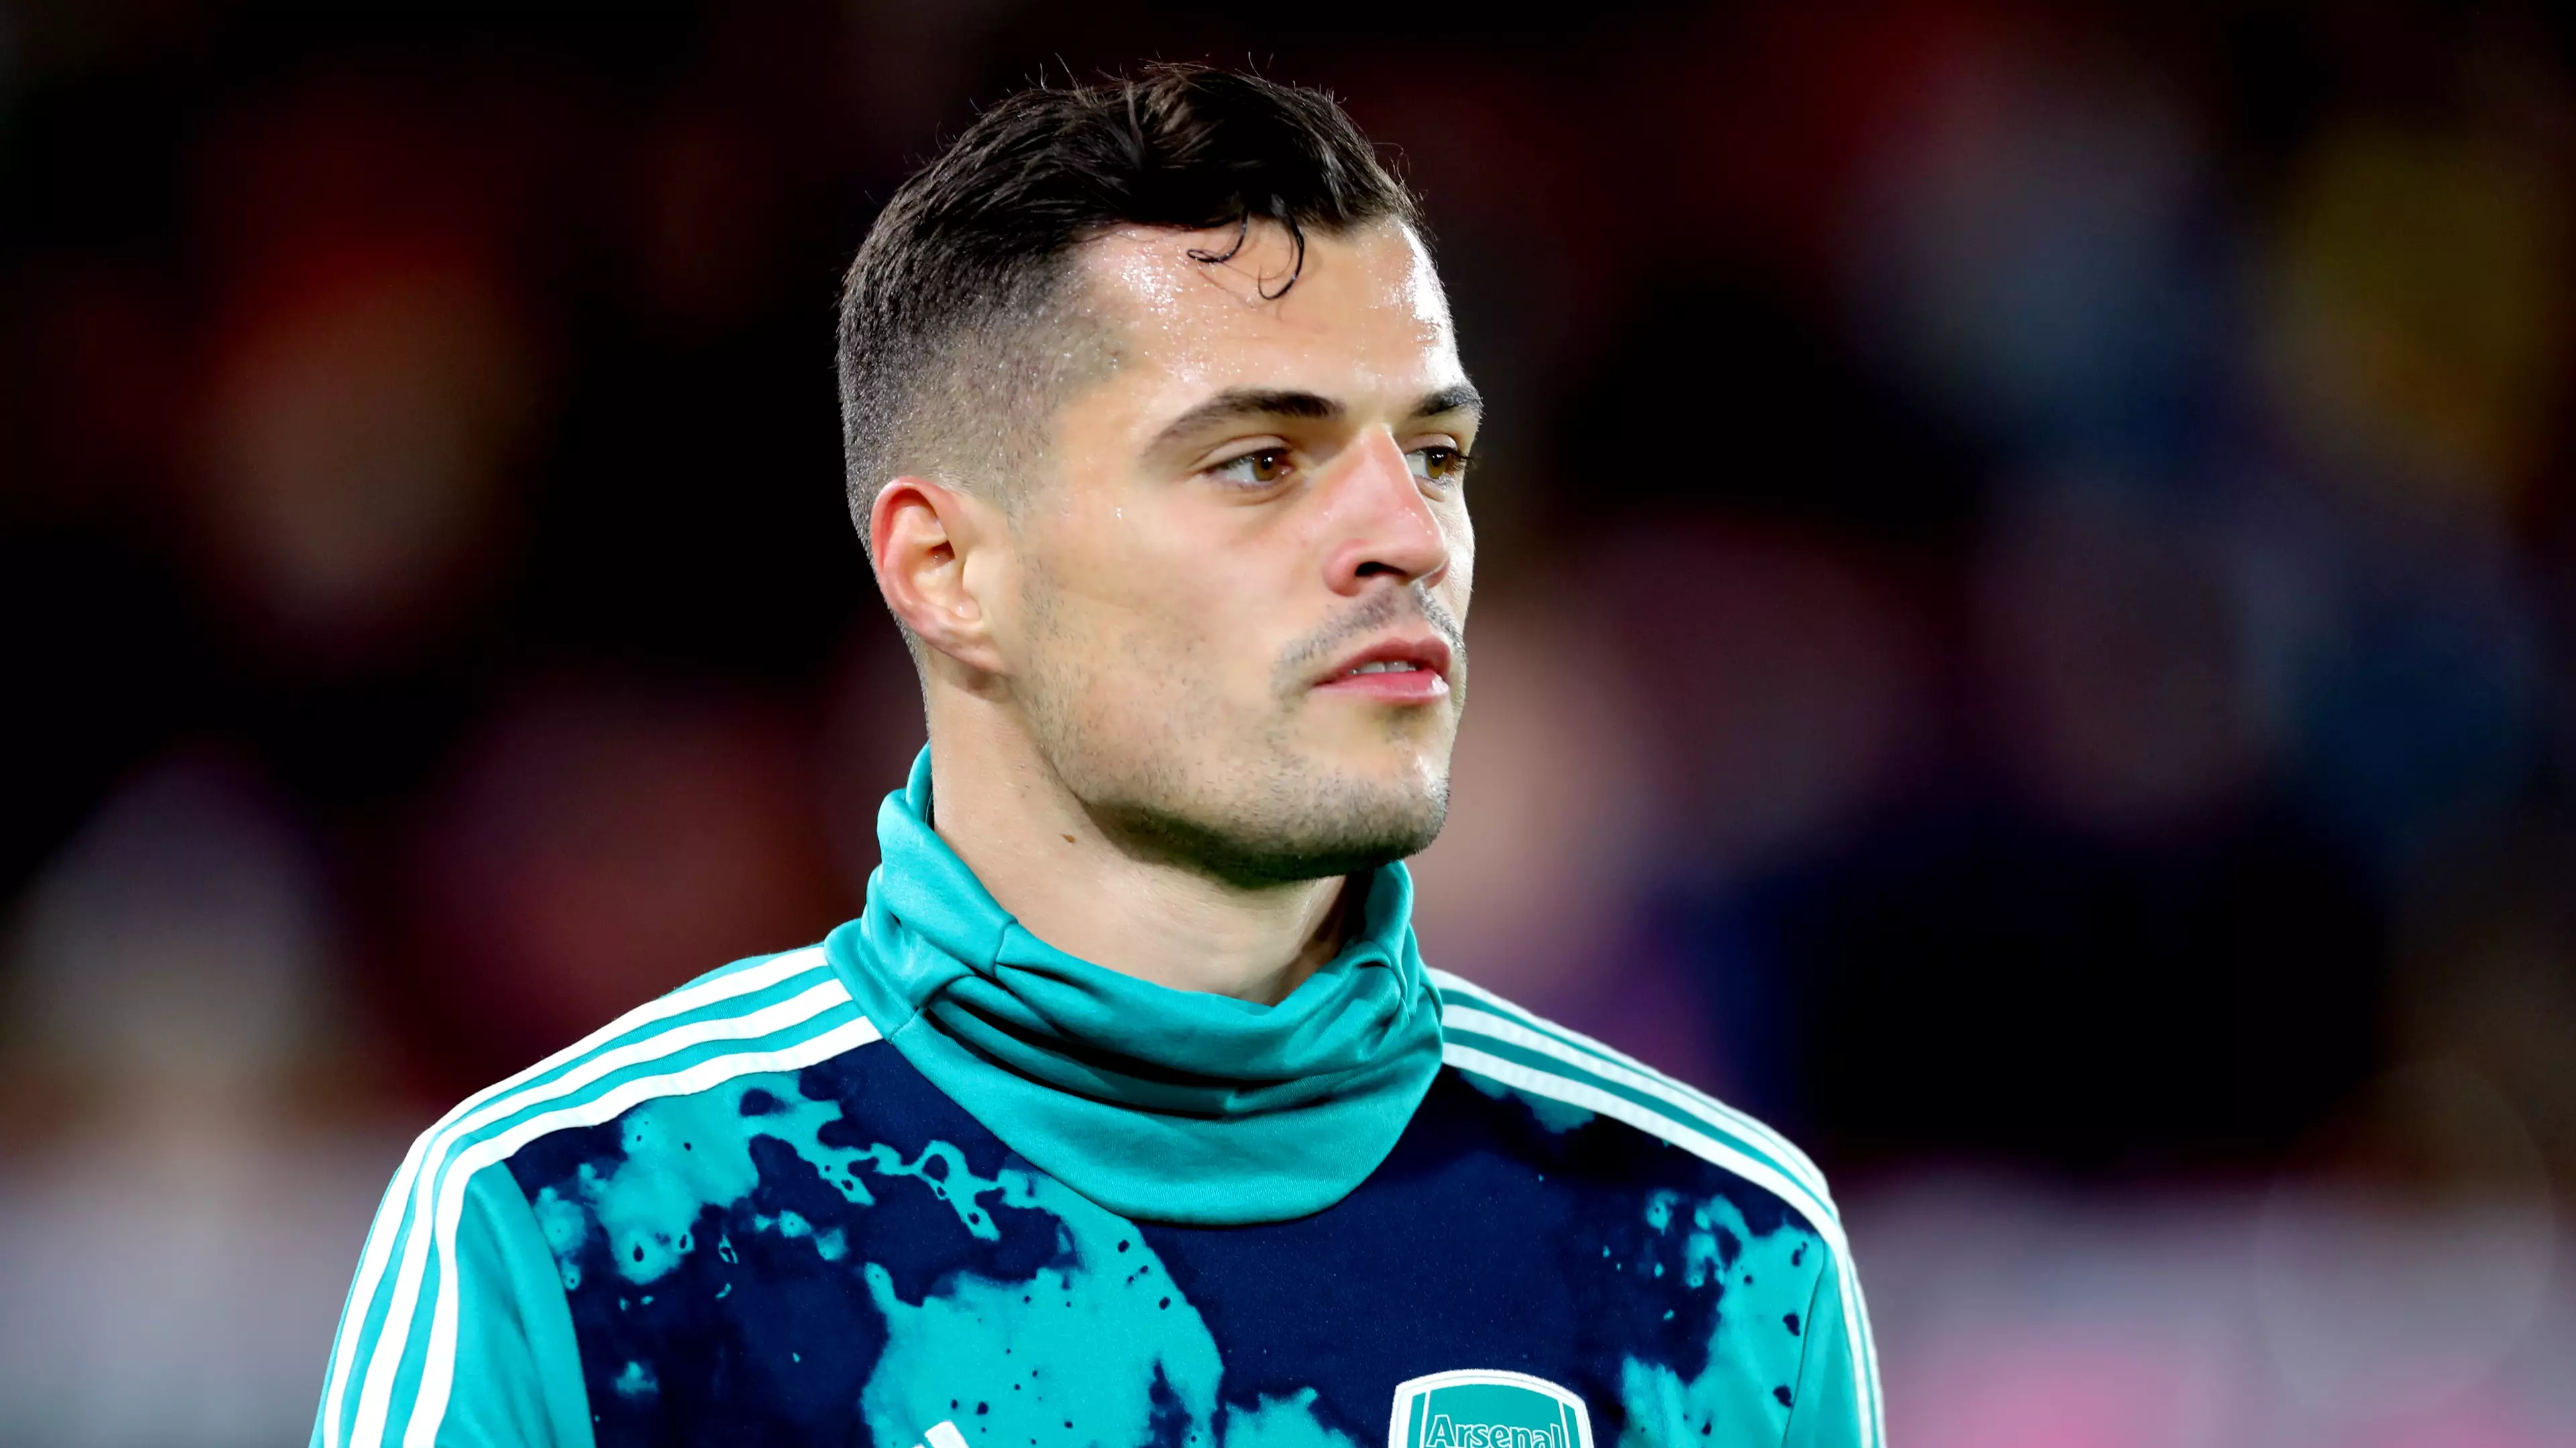 Arsenal's Granit Xhaka Issues Emotional Statement Following Sunday's Incident 